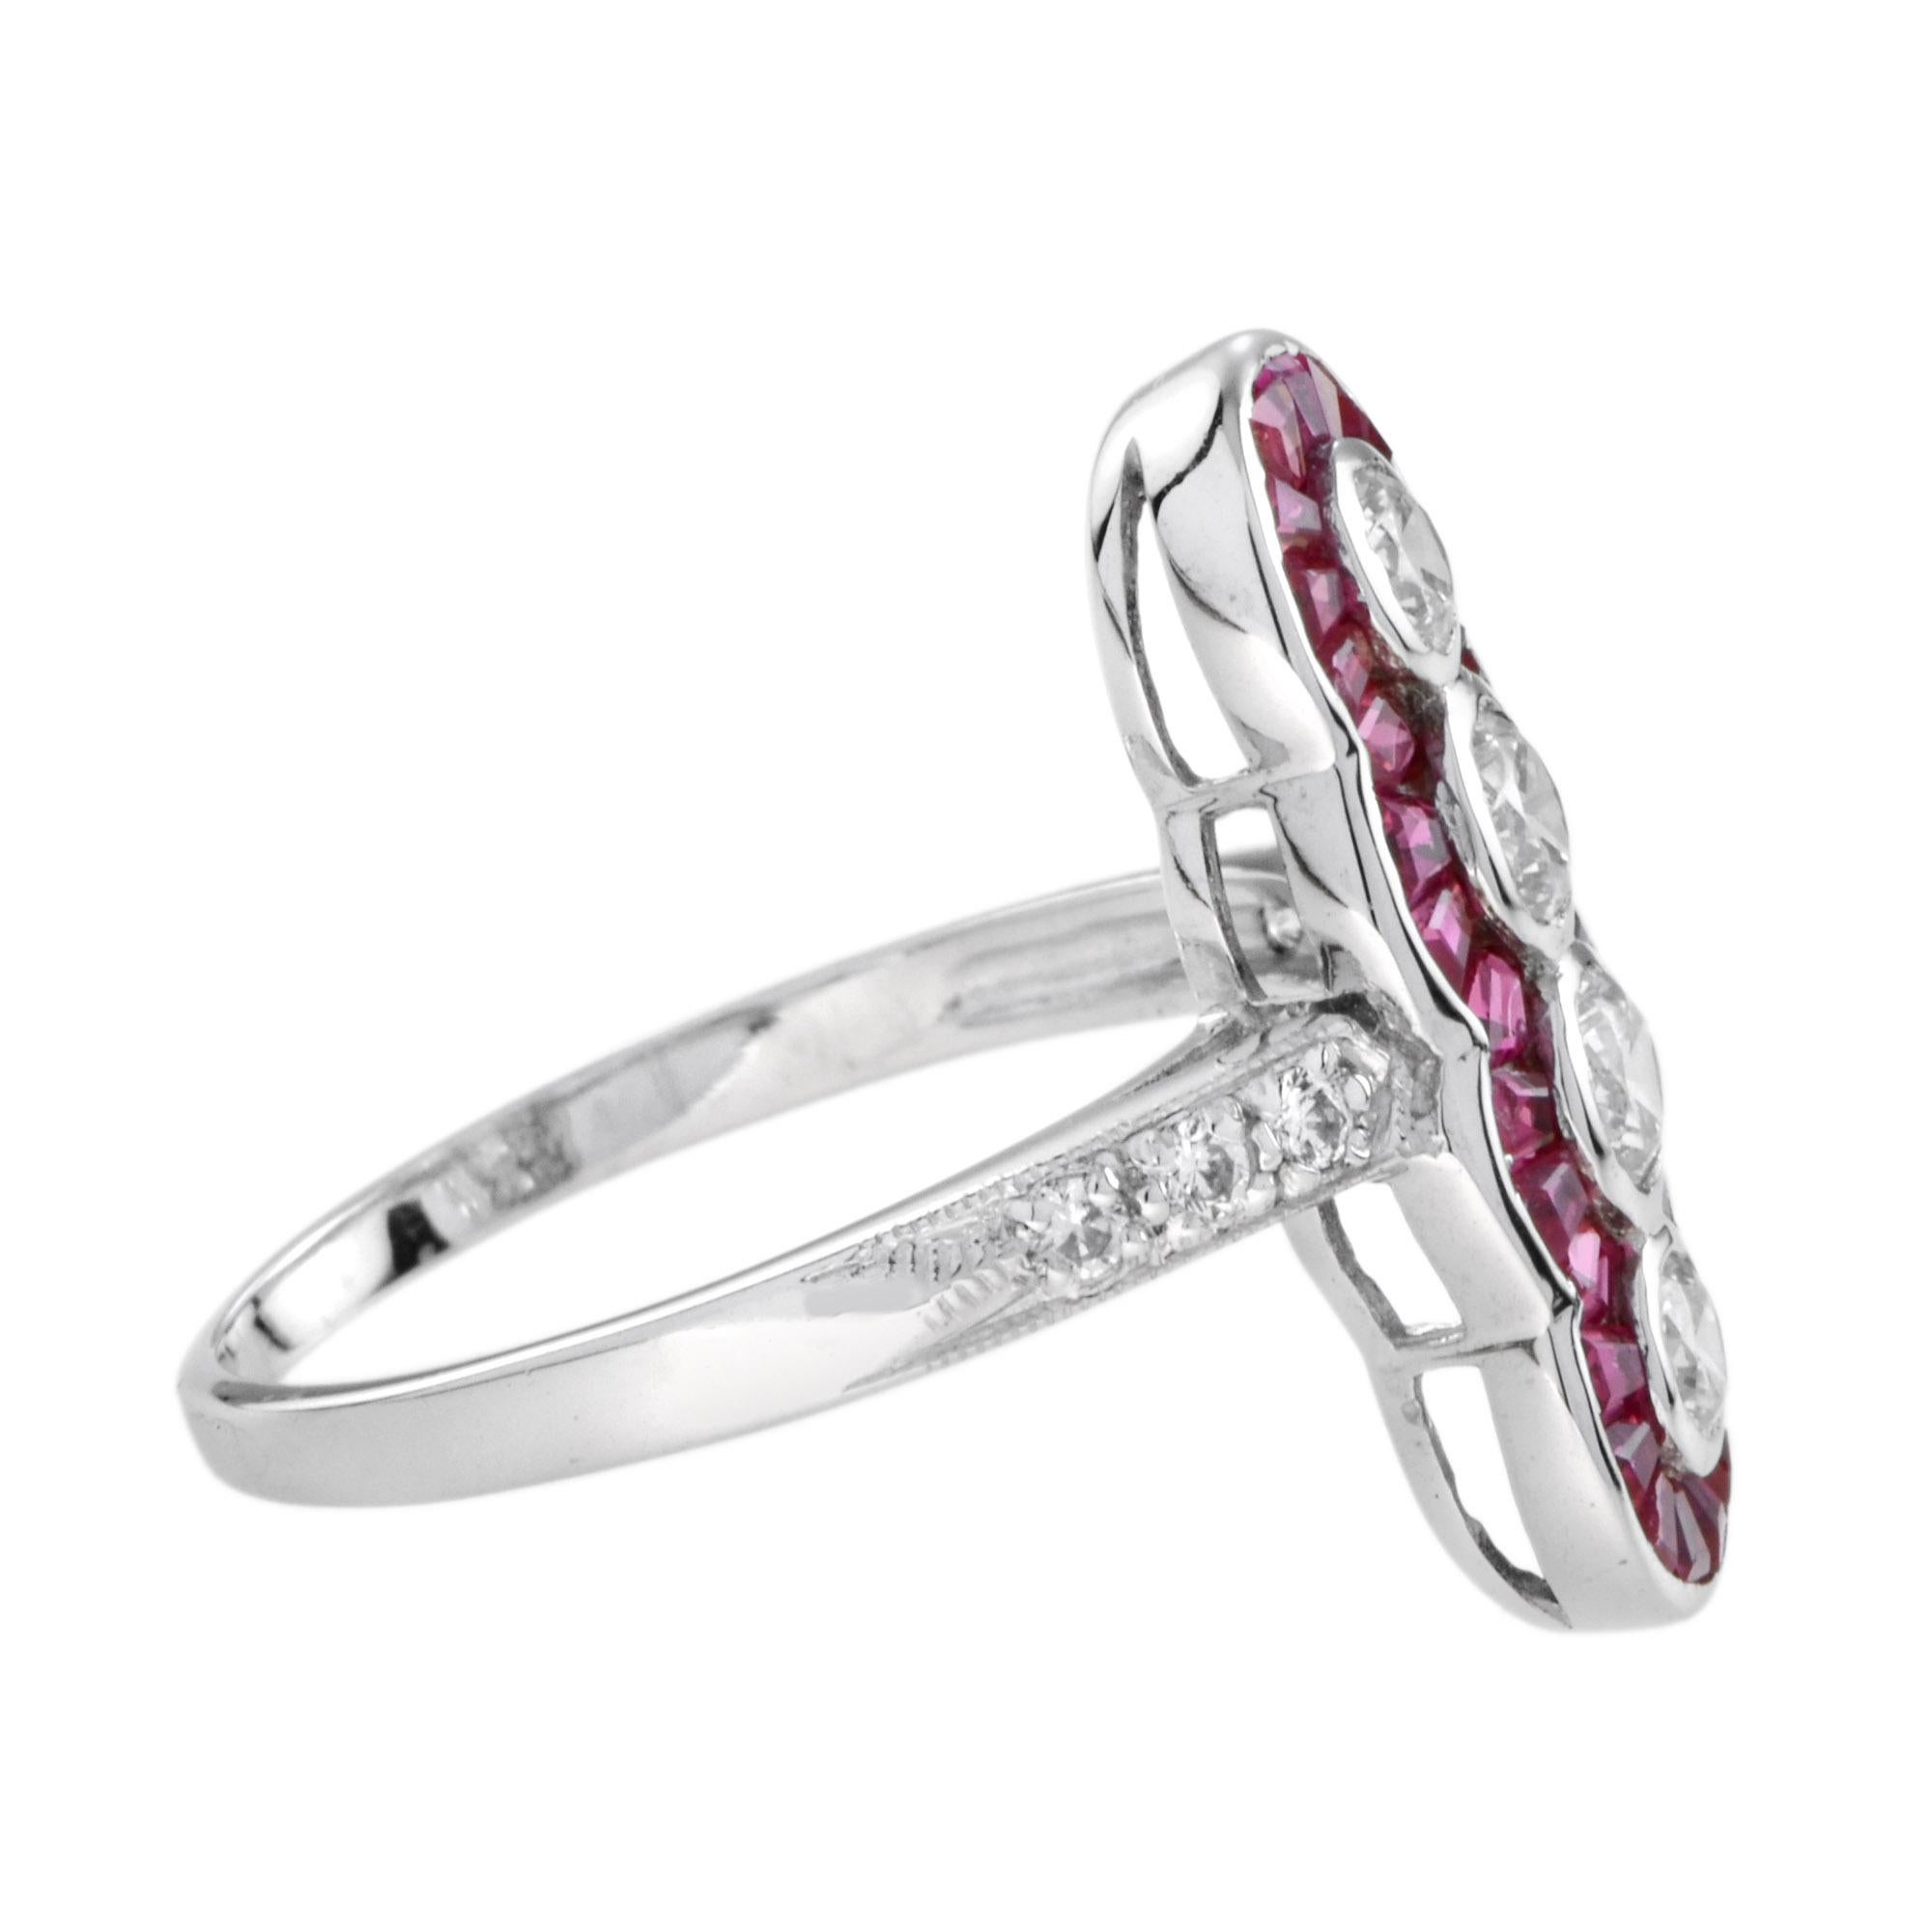 For Sale:  Four Stone Diamond and Ruby Cocktail Ring in 14K White Gold 4